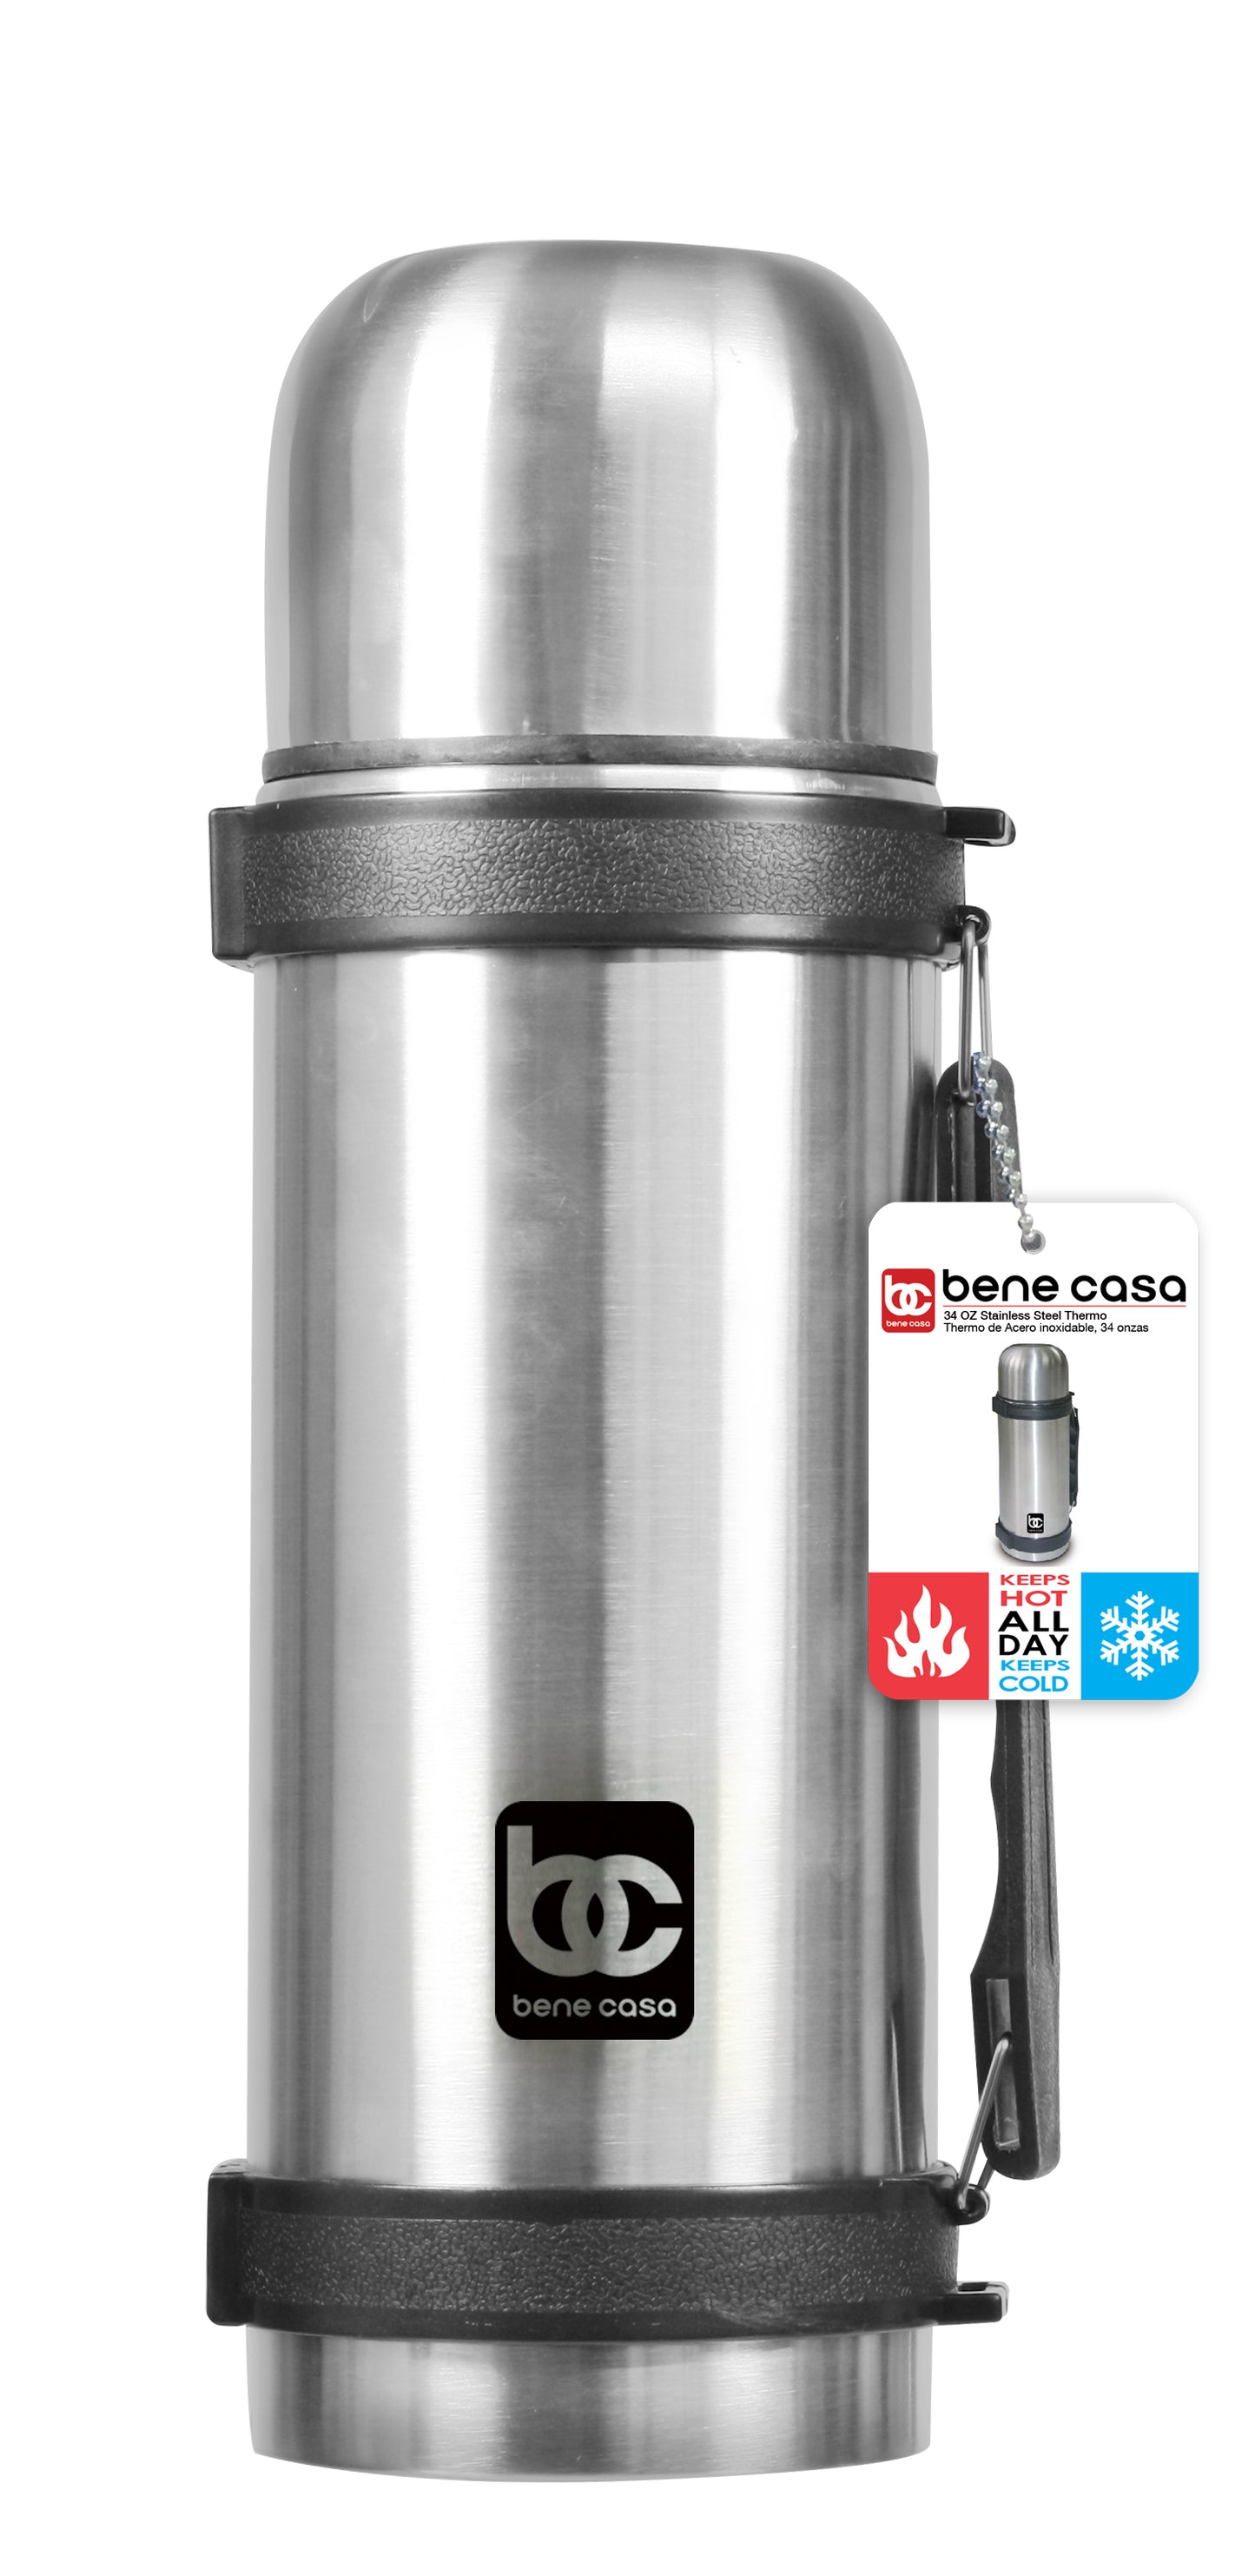 Stanley Thermos 32oz Stainless Steel Vacuum Hot/Cold Bottle with Handle